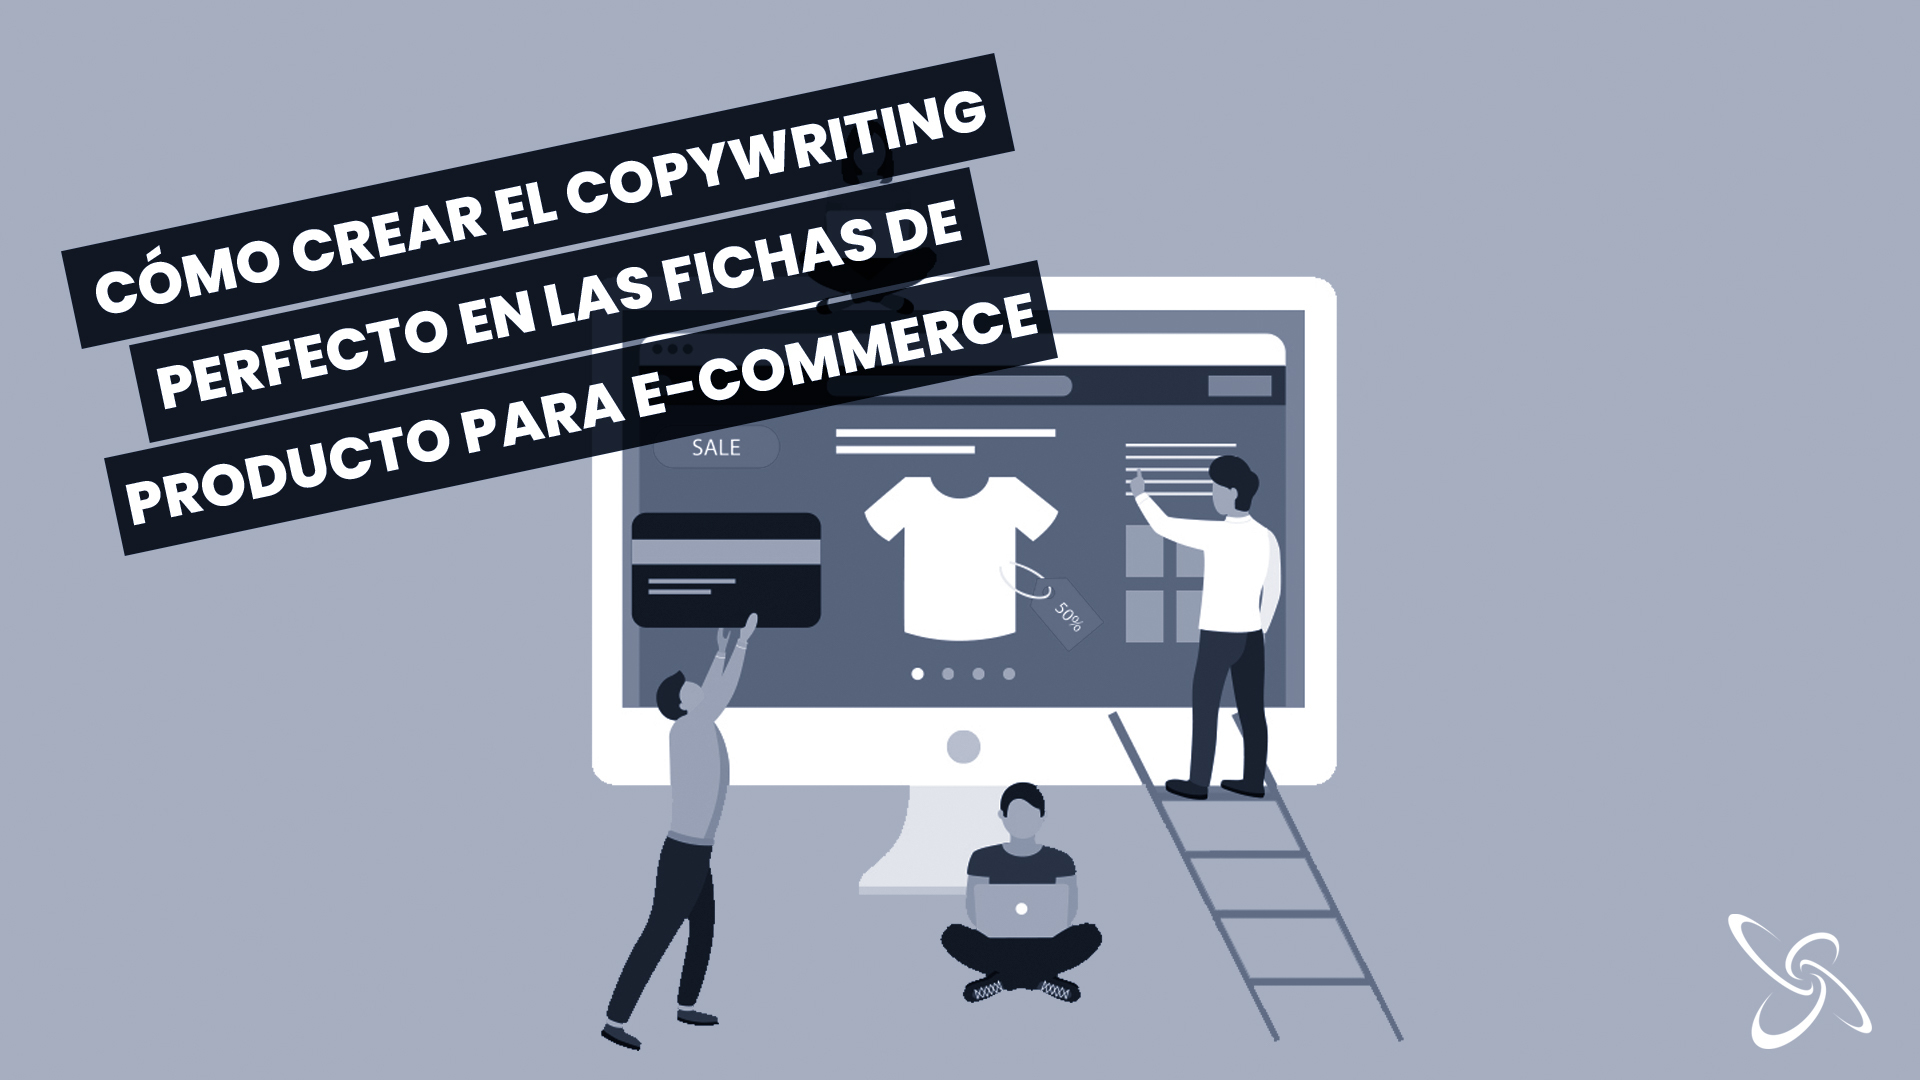 How to create the perfect copywriting on product sheets for e-commerce